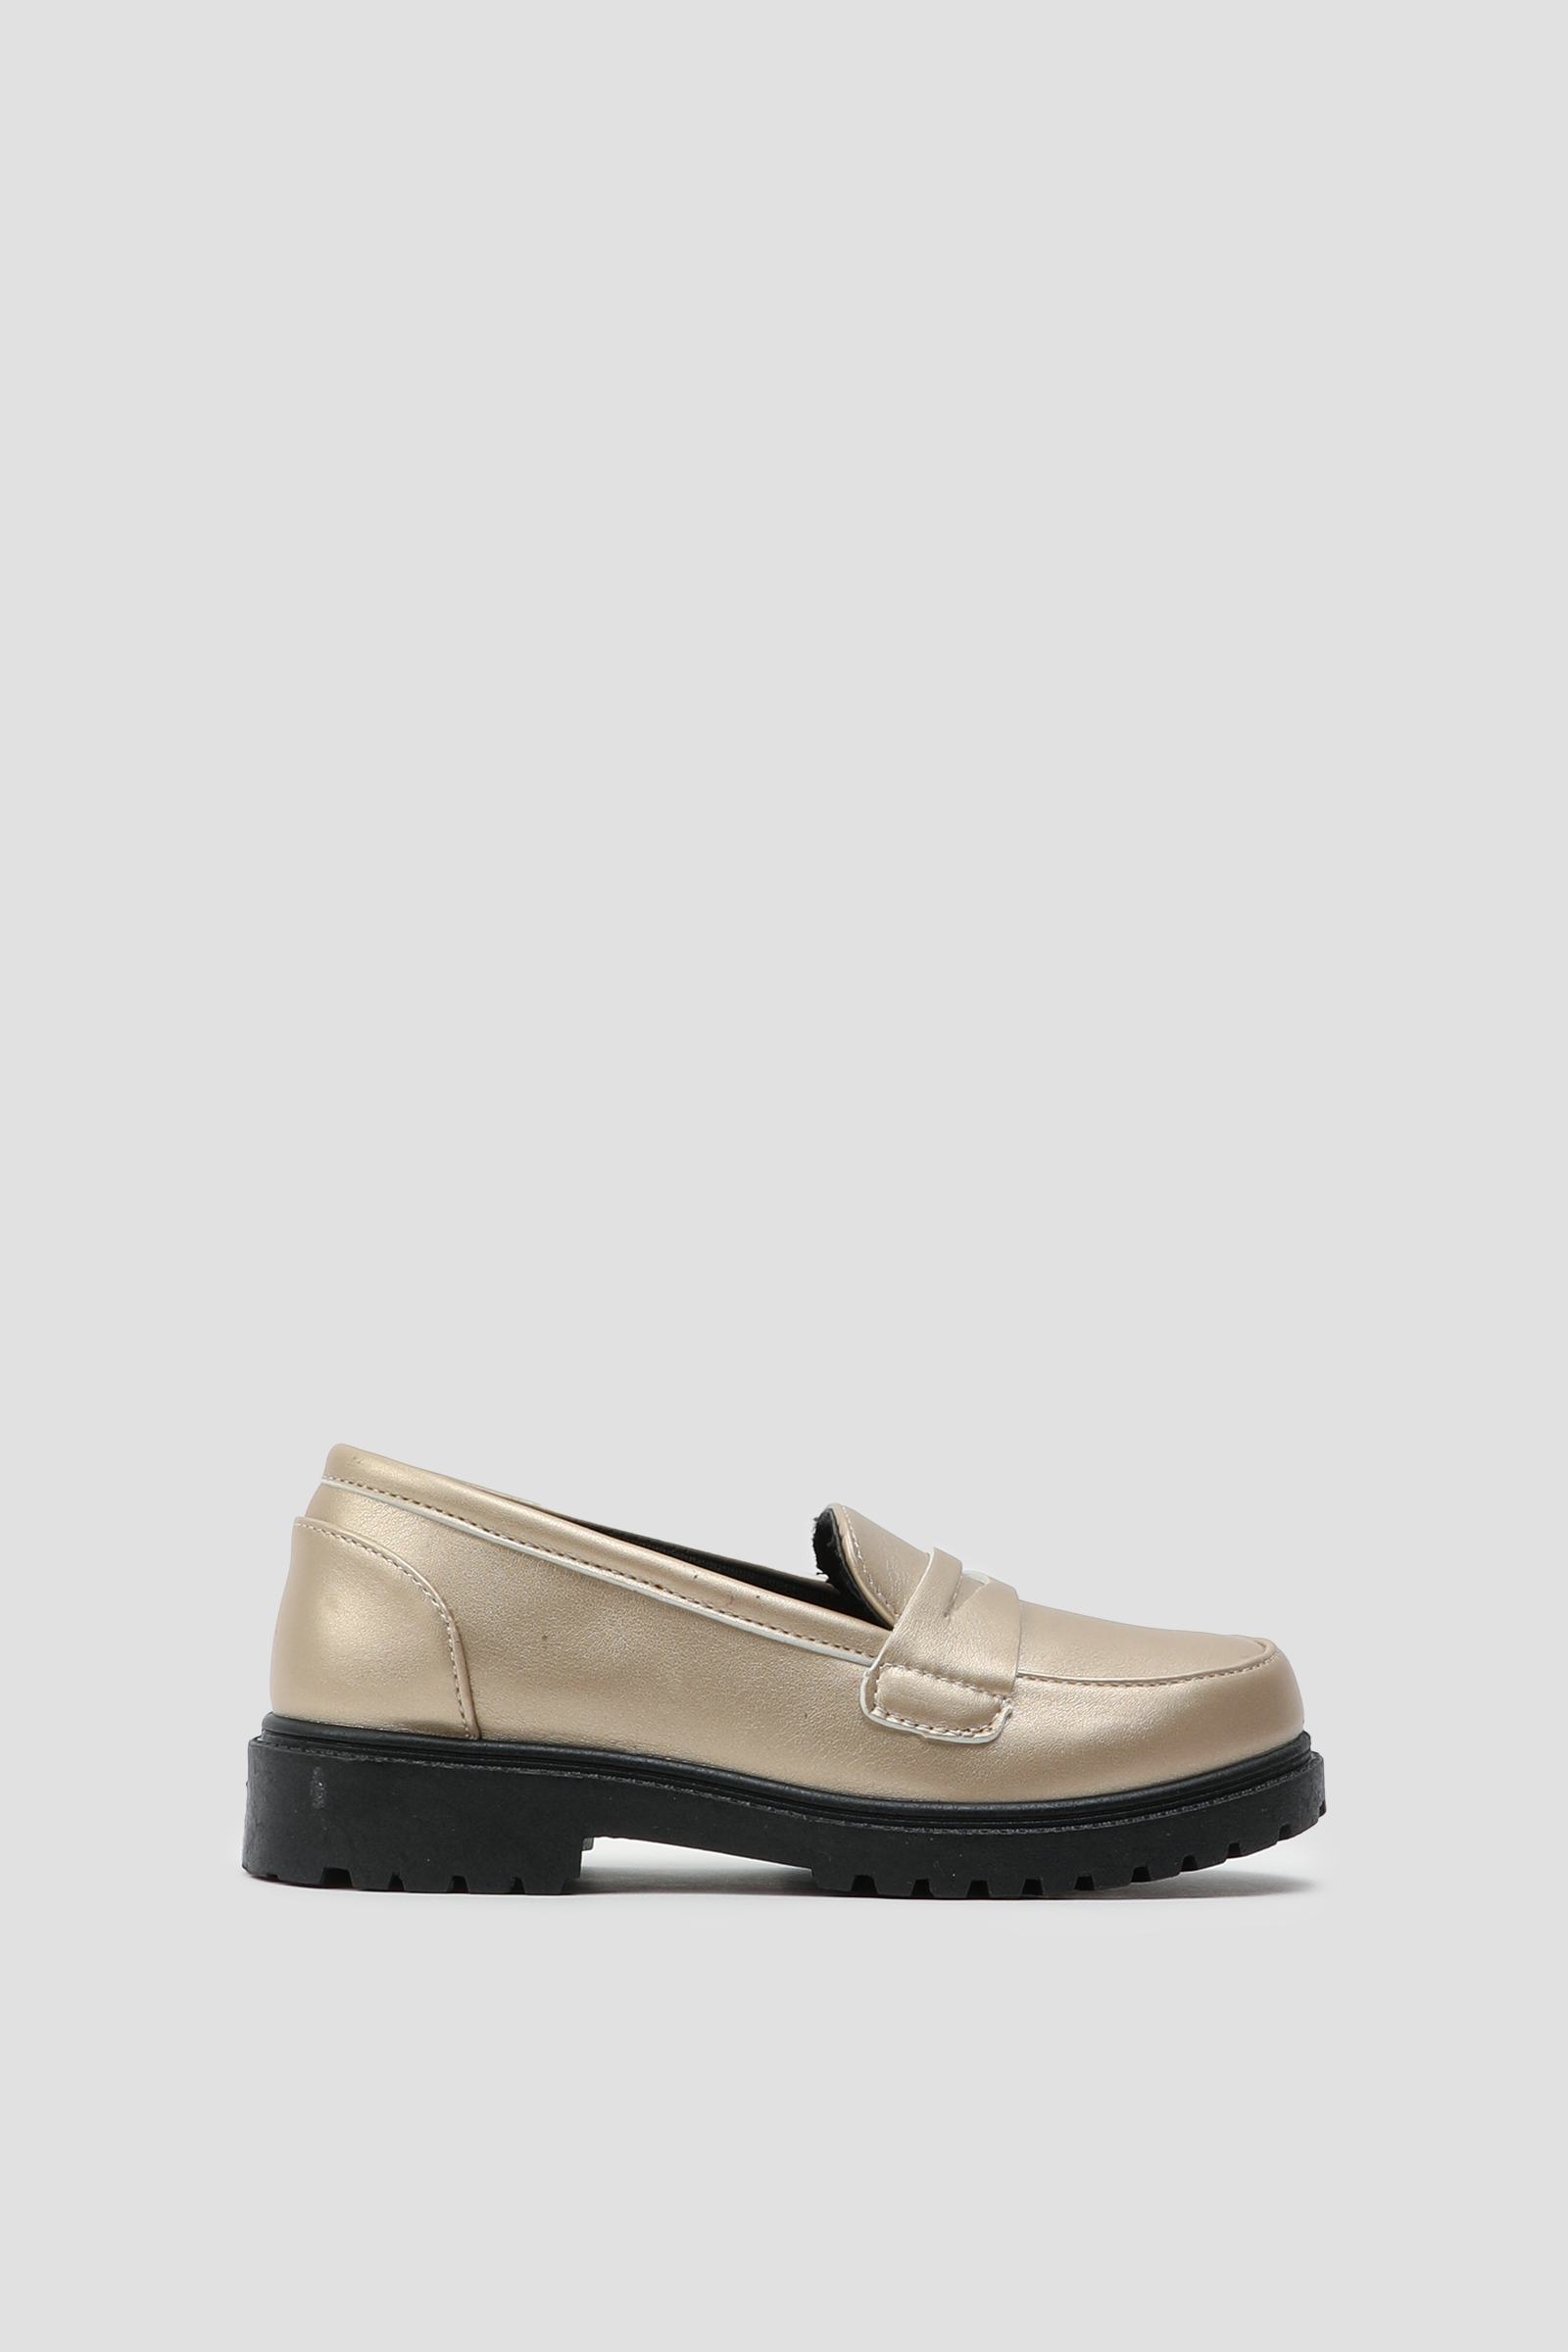 Ardene Metallic Loafers in Gold | Size | Rubber